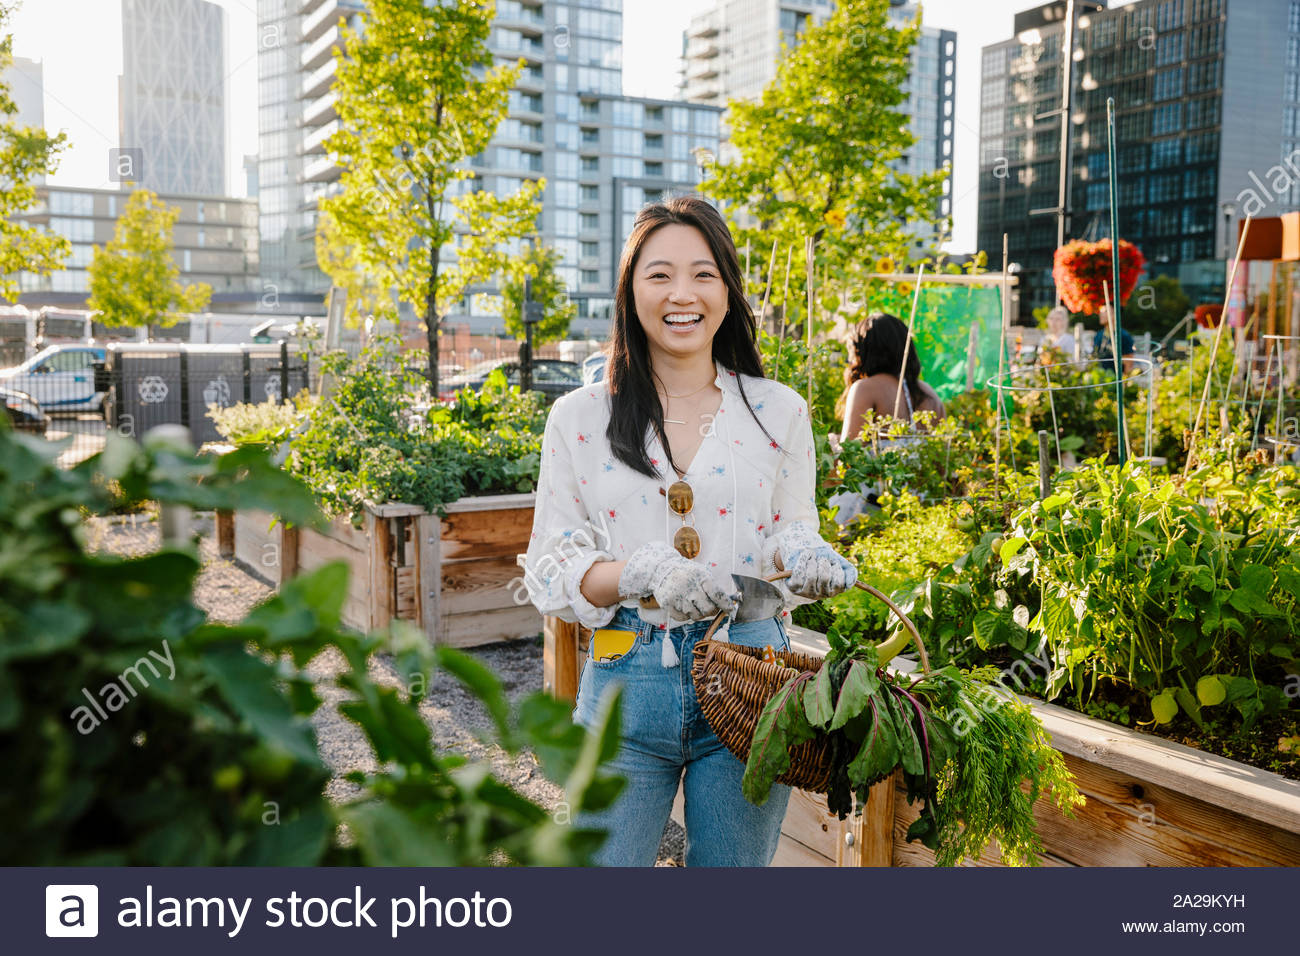 Portrait happy, carefree young woman harvesting fresh vegetables in urban community garden Stock Photo